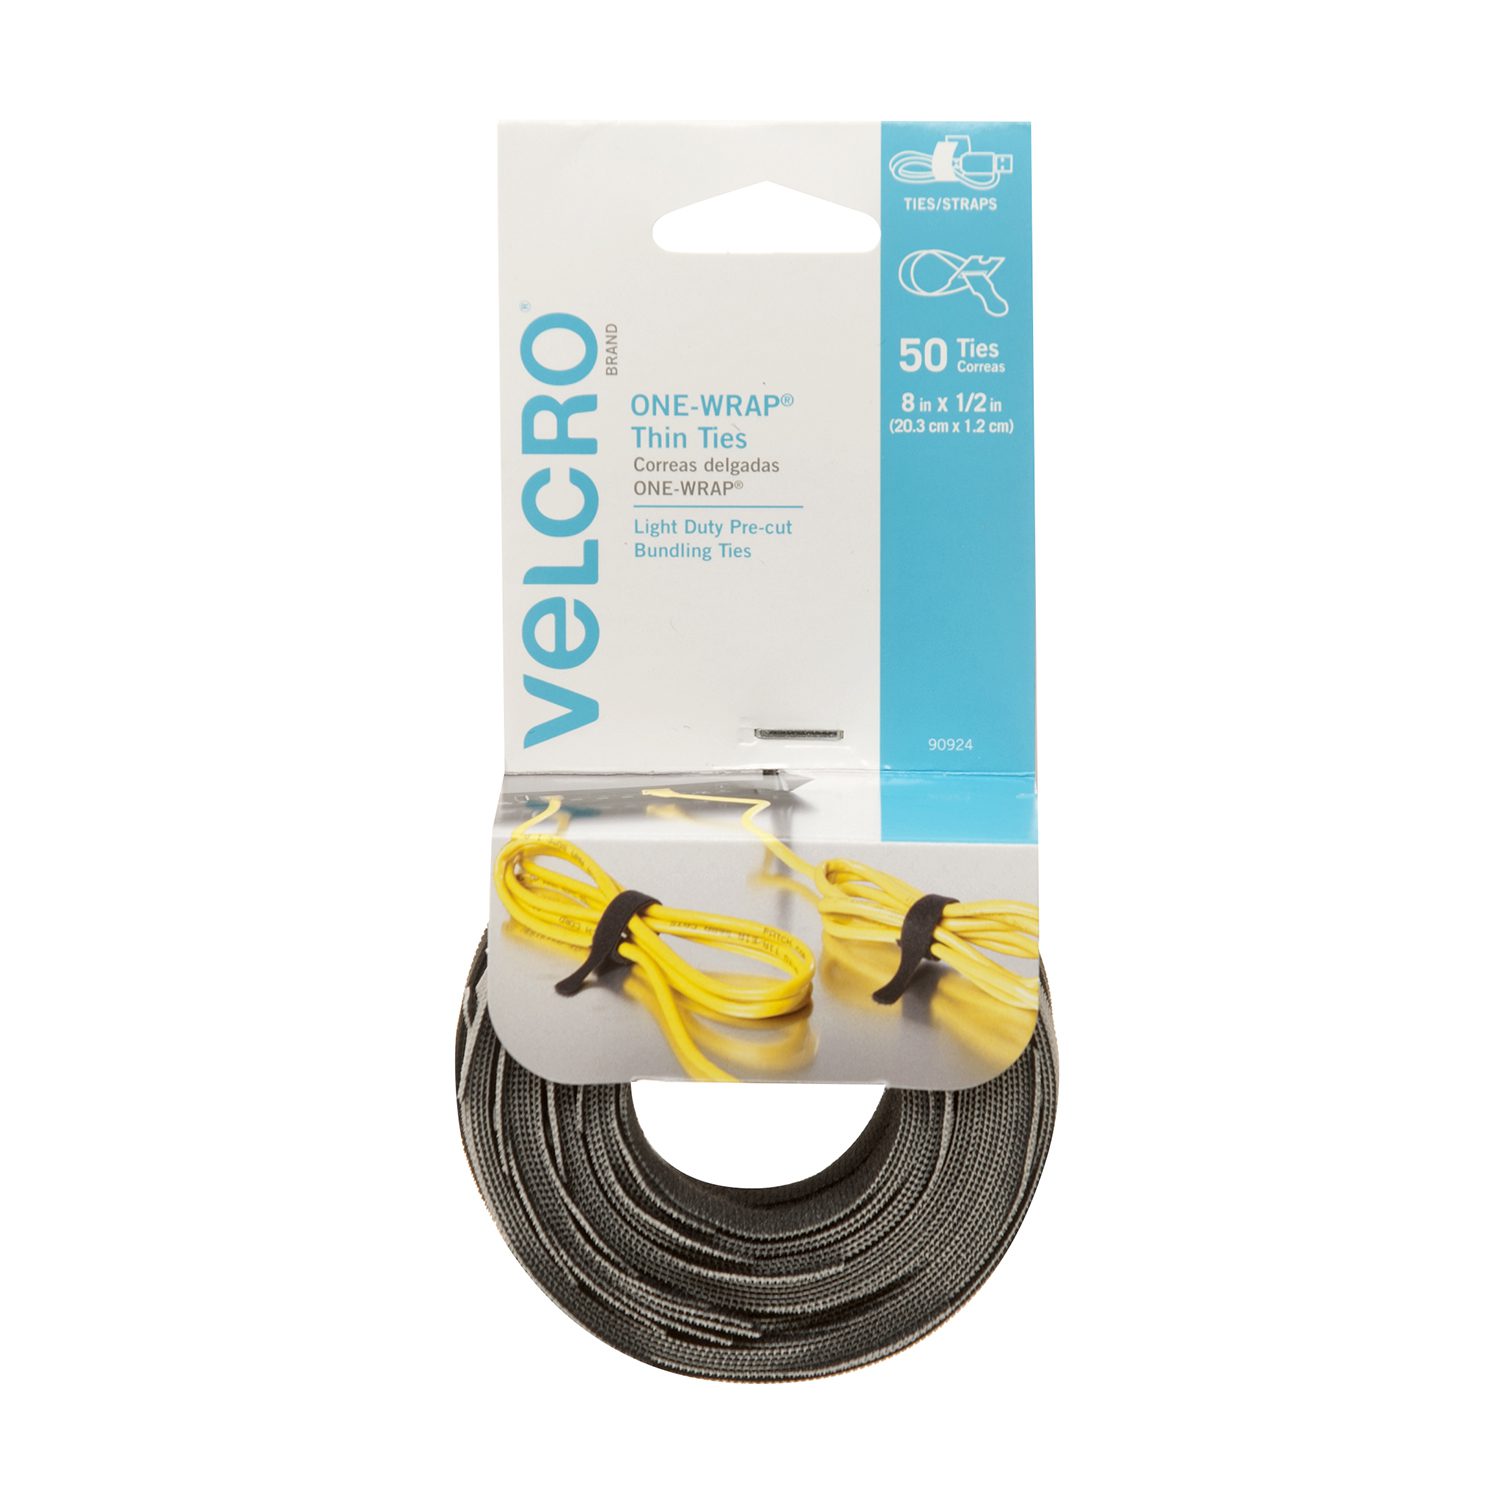 VELCRO Brand ONE-WRAP, 151501 Hook and Loop Cable Ties